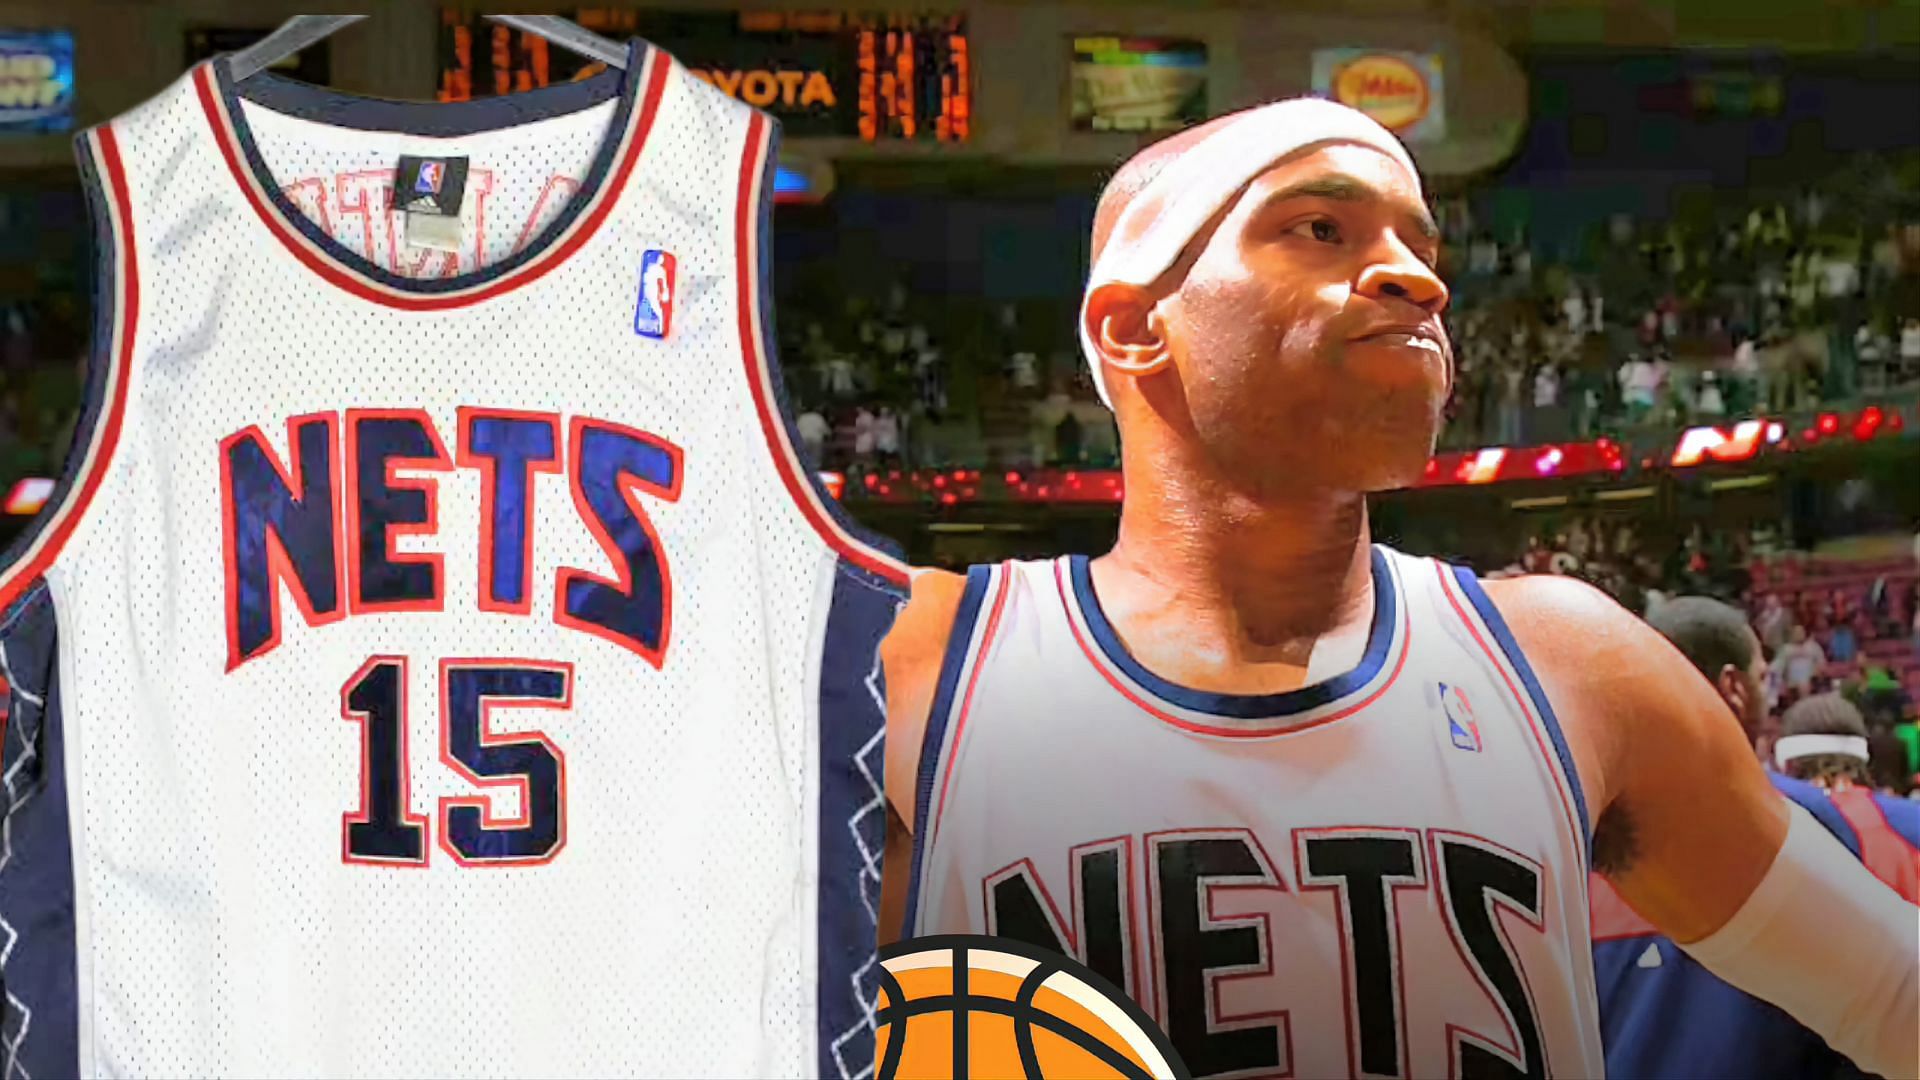 &ldquo;After retirement I&rsquo;ve gotten soft&rdquo; - Vince Carter hilariously shares candid sentiments amid Brooklyn Nets retiring his jersey